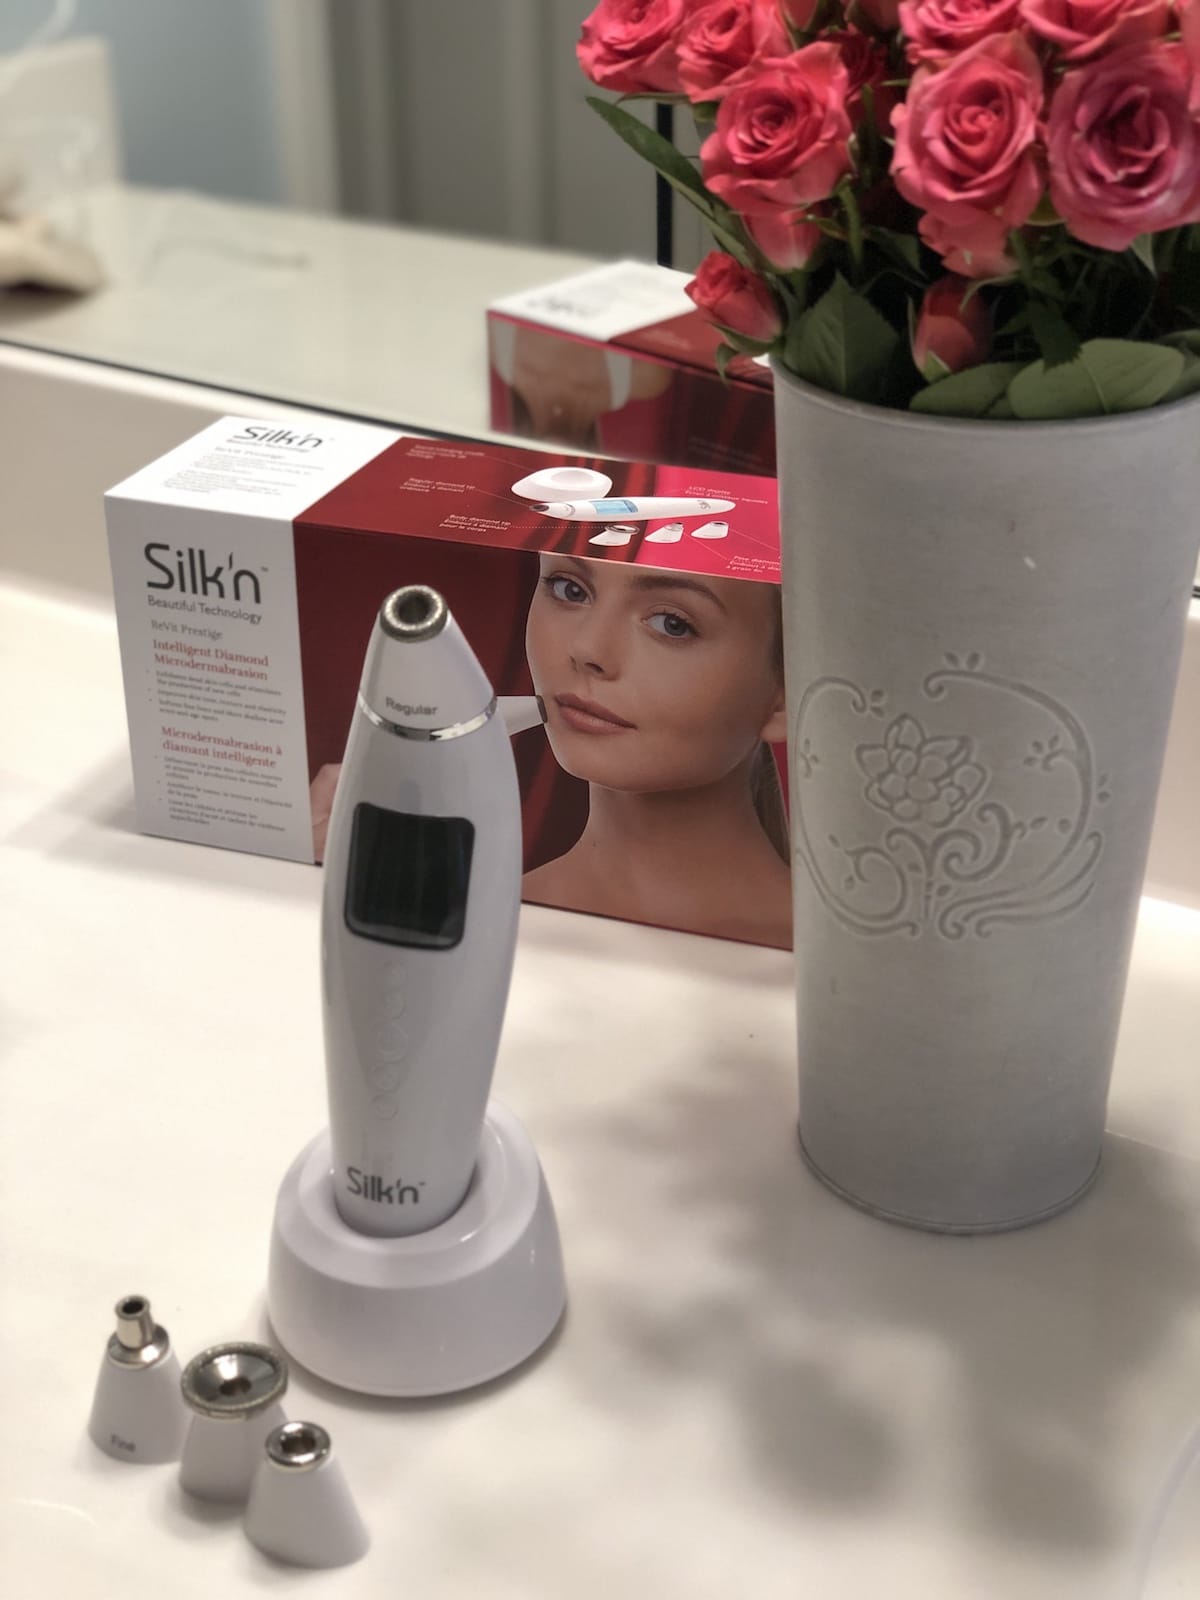 Spoil Your Skin: The Best Microdermabrasion Treatment at Home - Silk'n ReVit Prestige